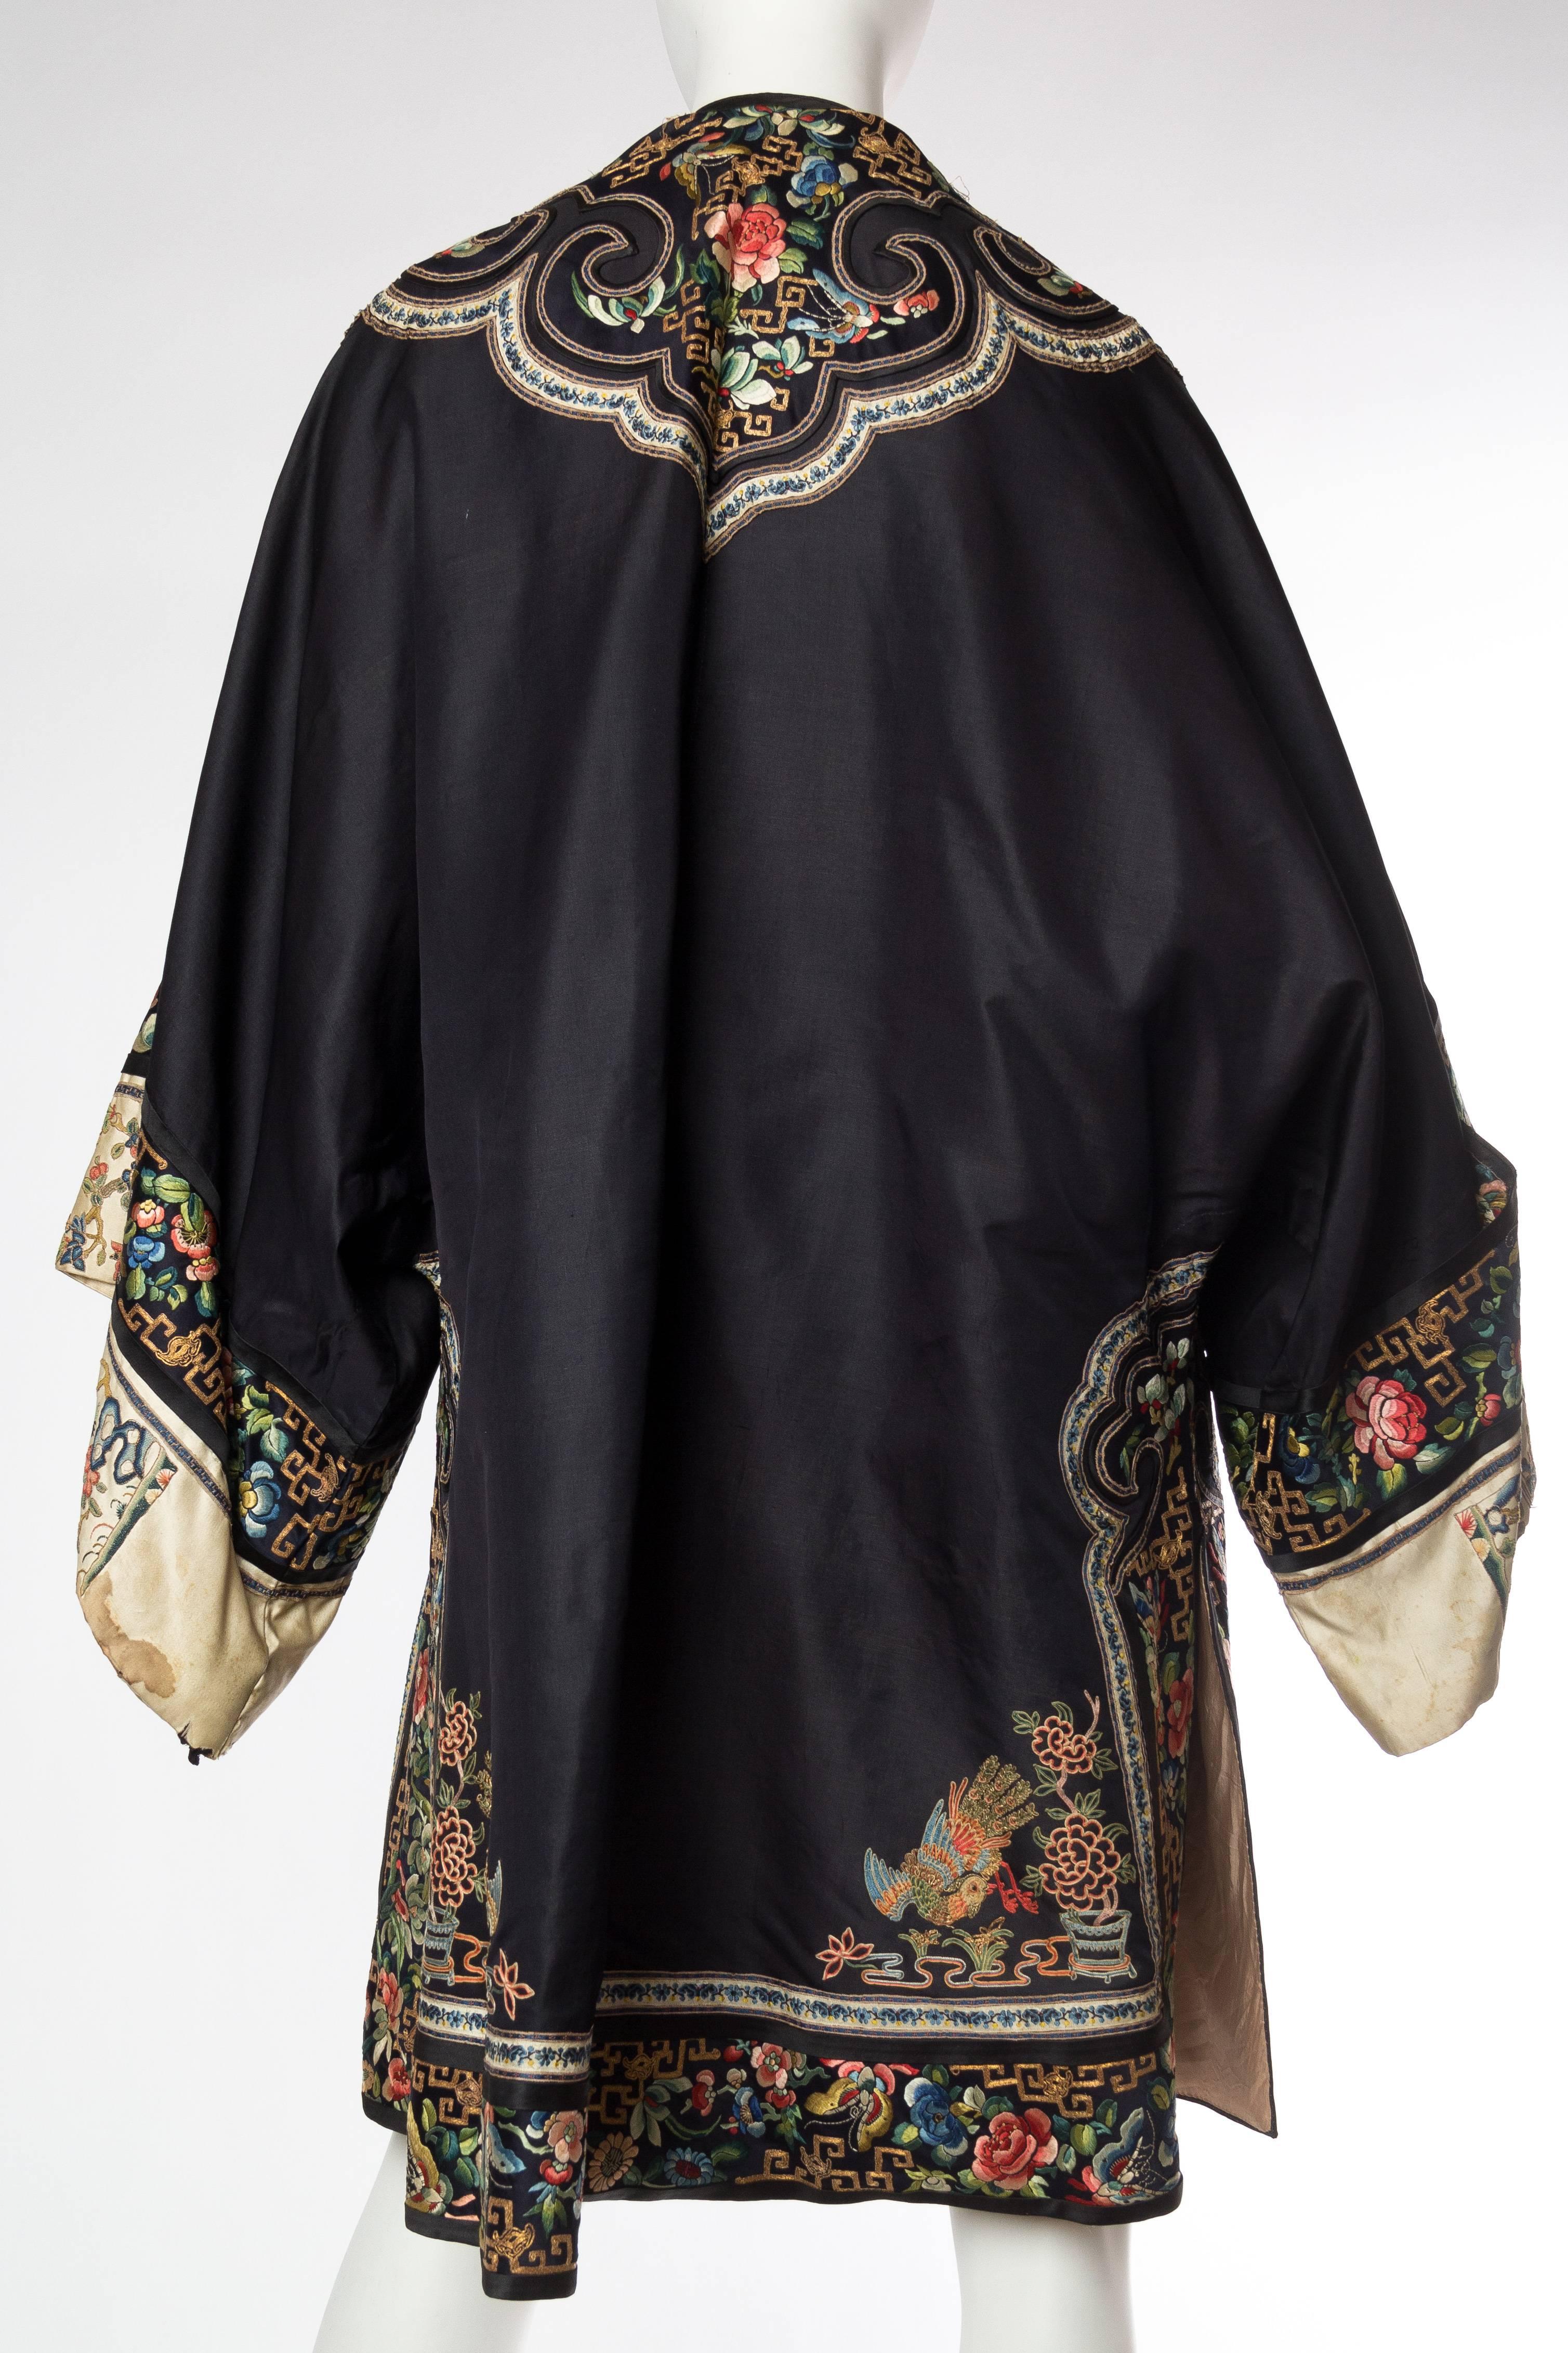 Black Antique Chinese Embroidered Jacket